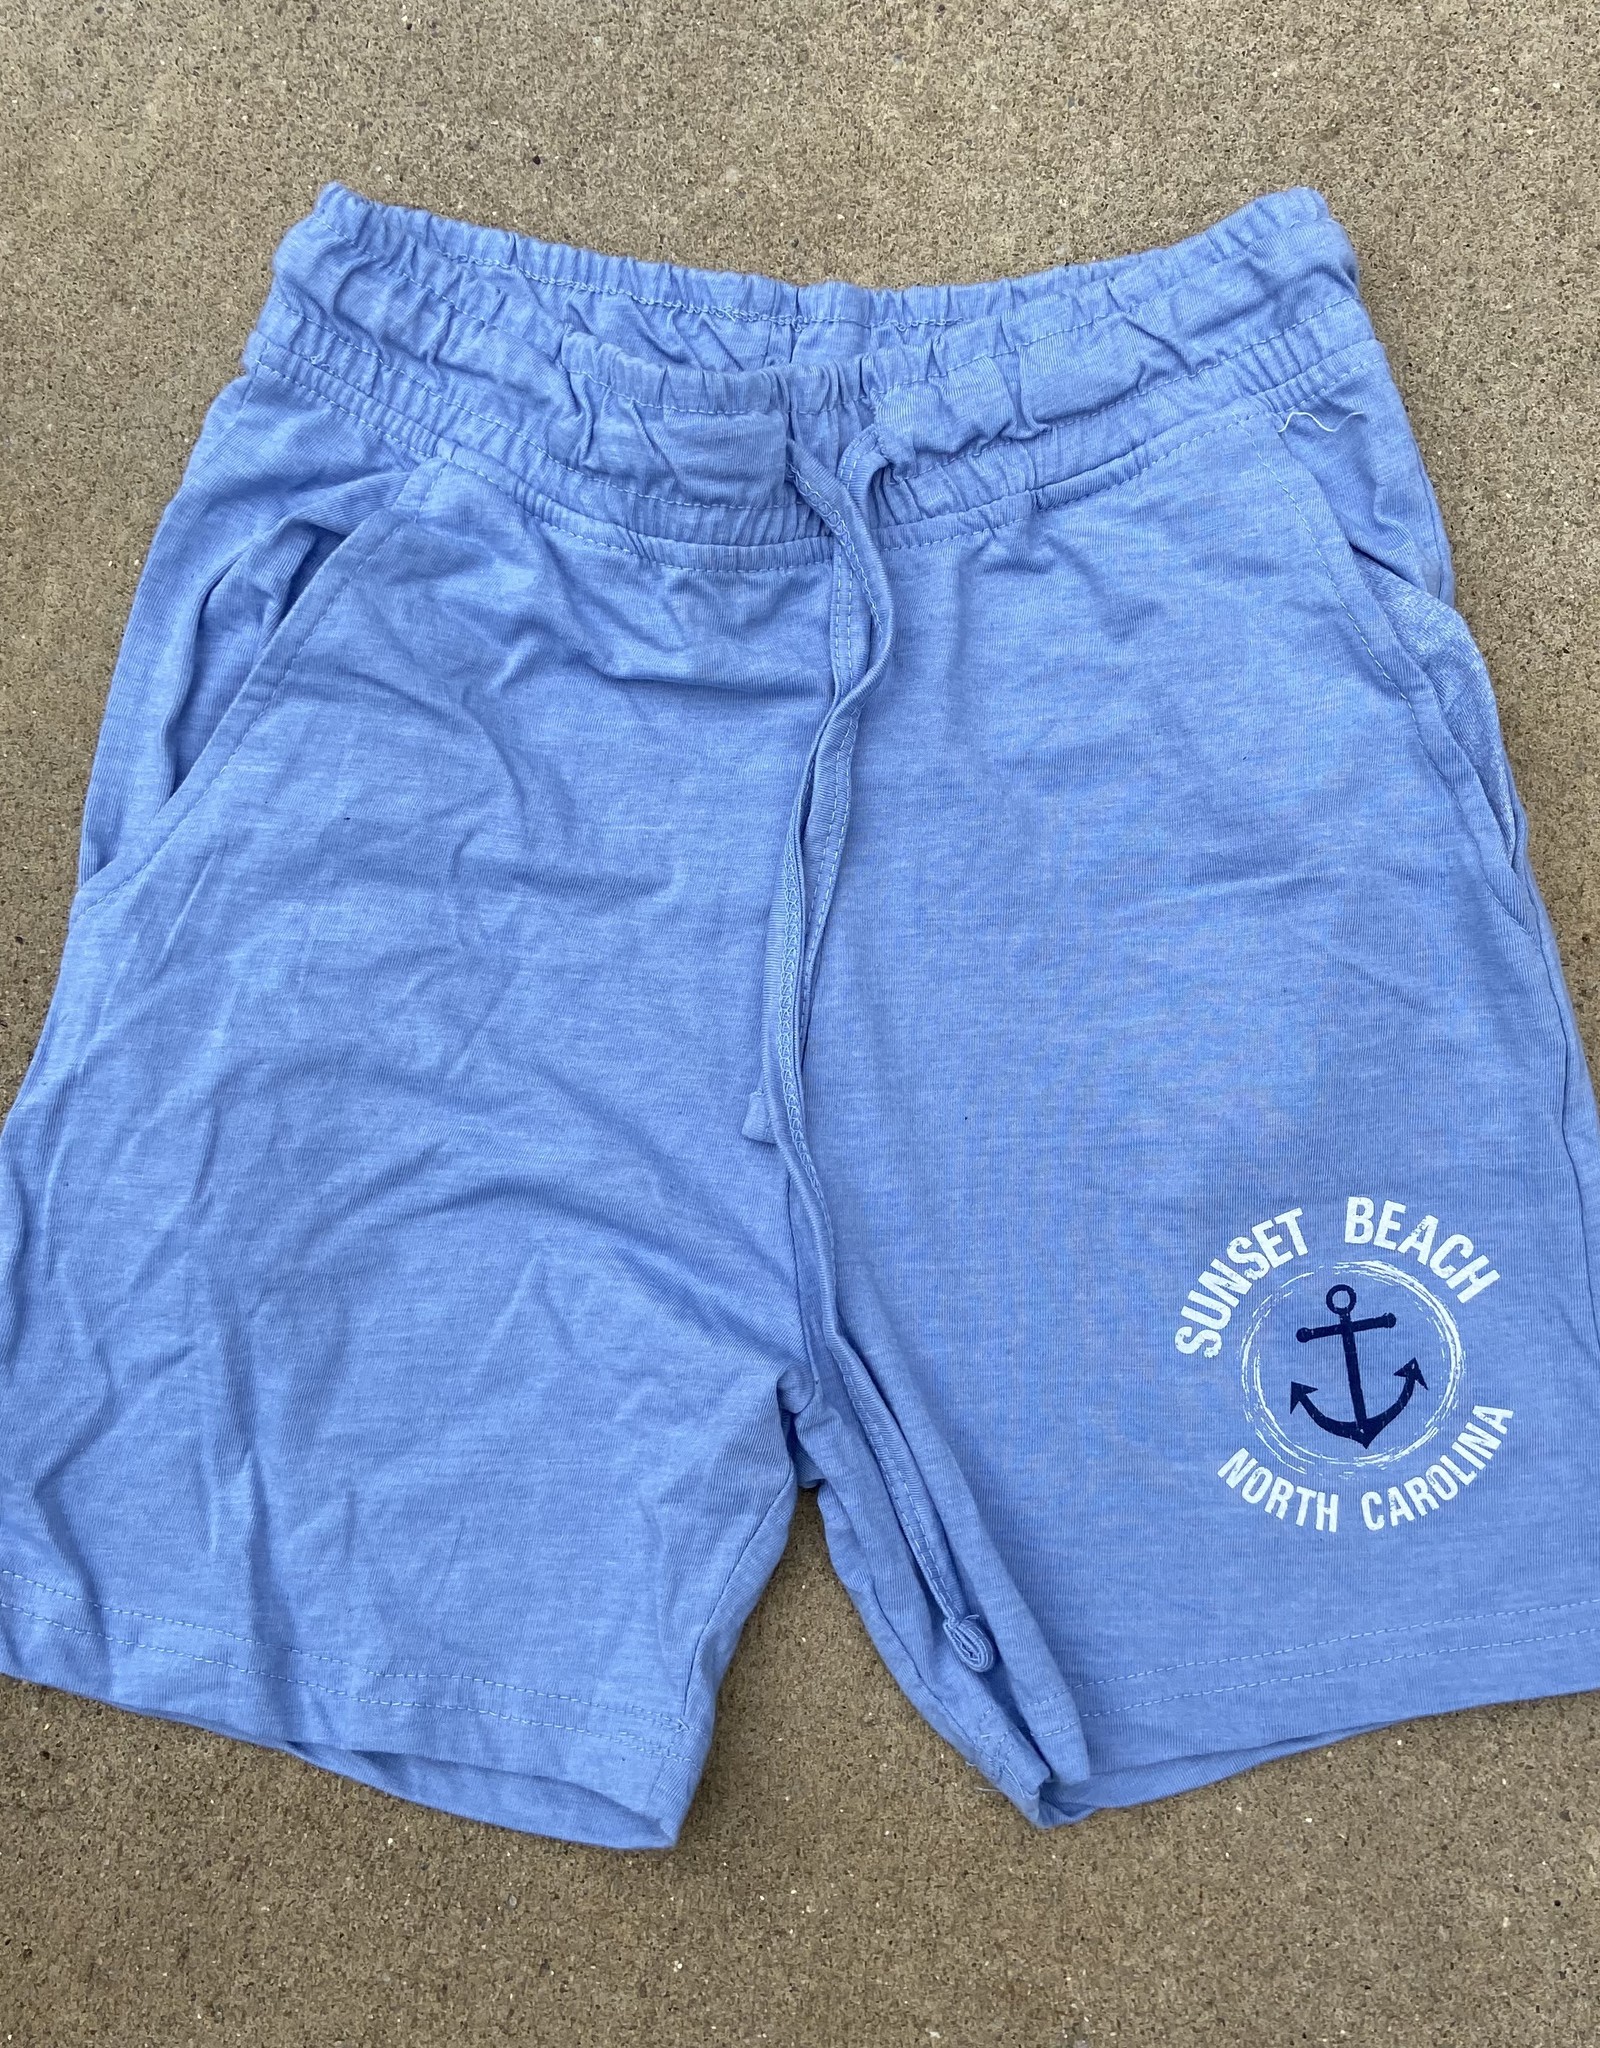 CLEARANCE ITEMS ANCHOR STAMP JERSEY SHORTS